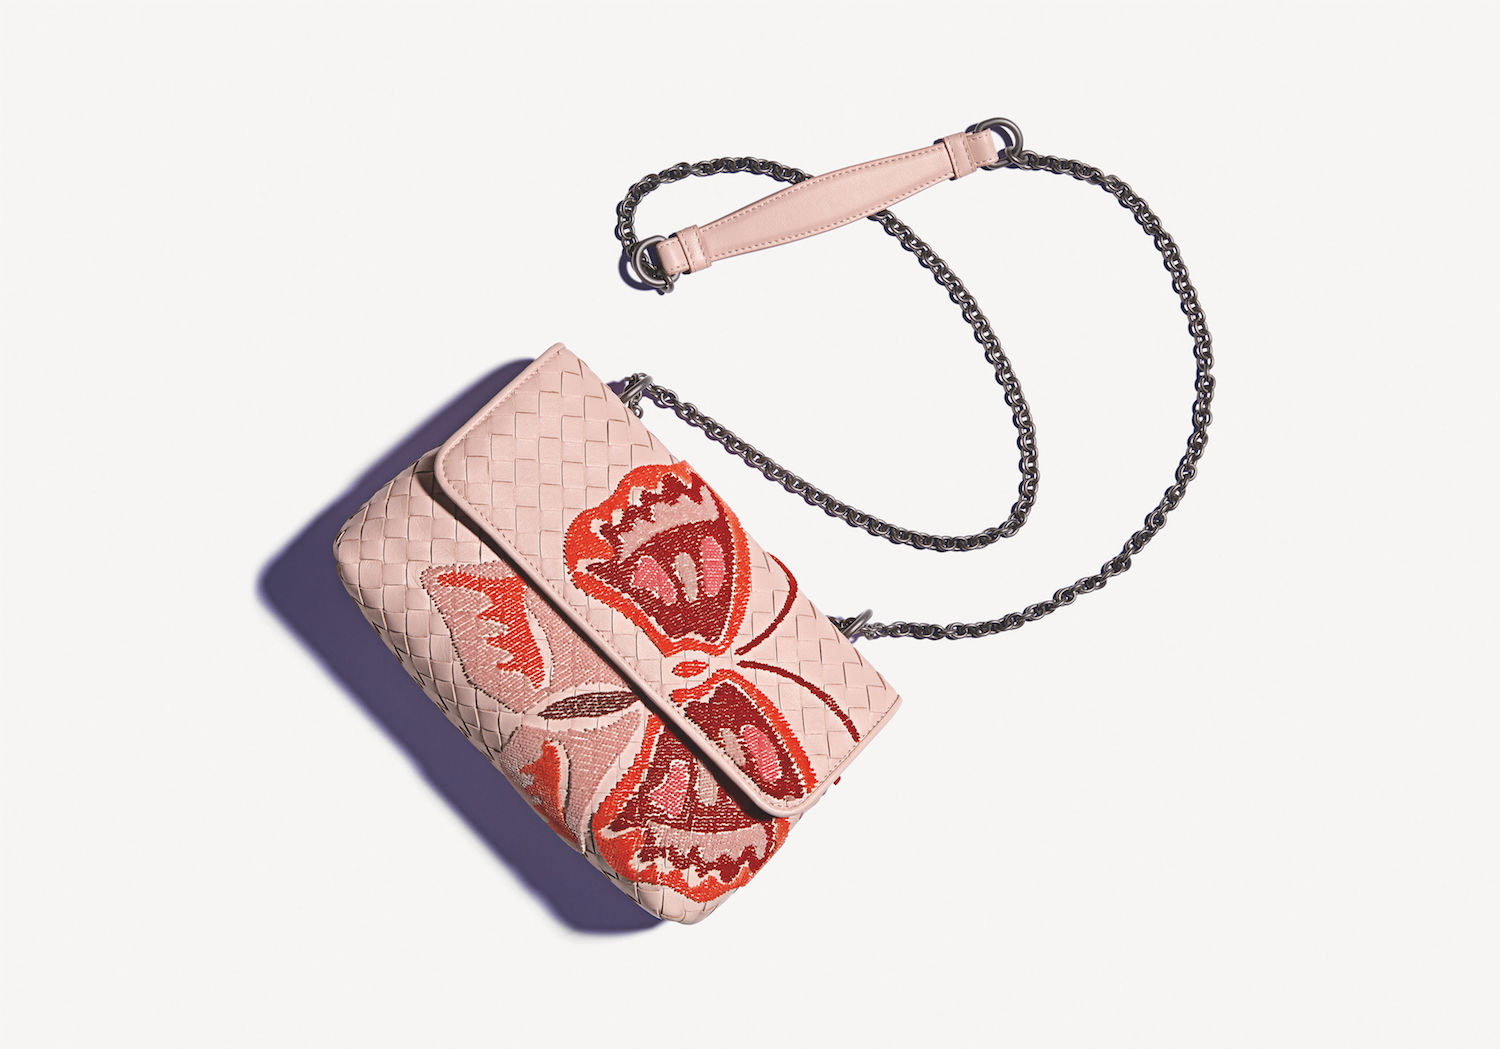 Bottega Veneta launches an Asia-exclusive Butterfly collection